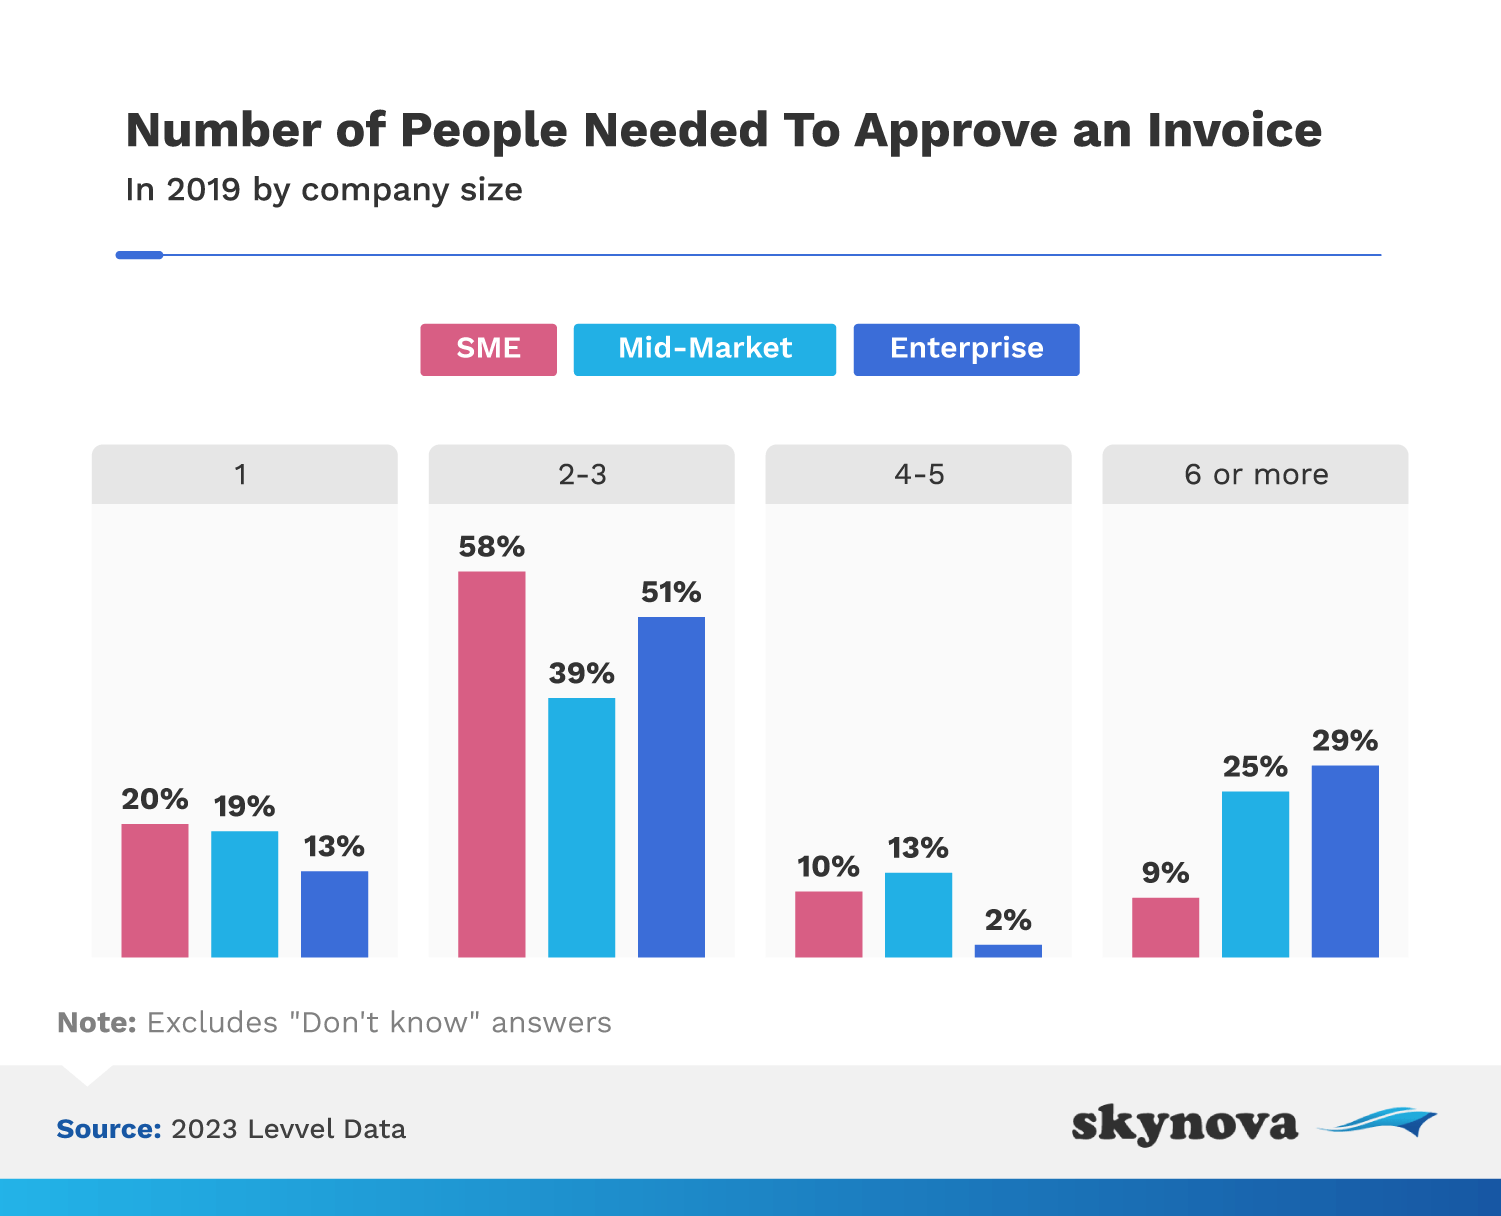 Number of people needed to approve an invoice, by company size